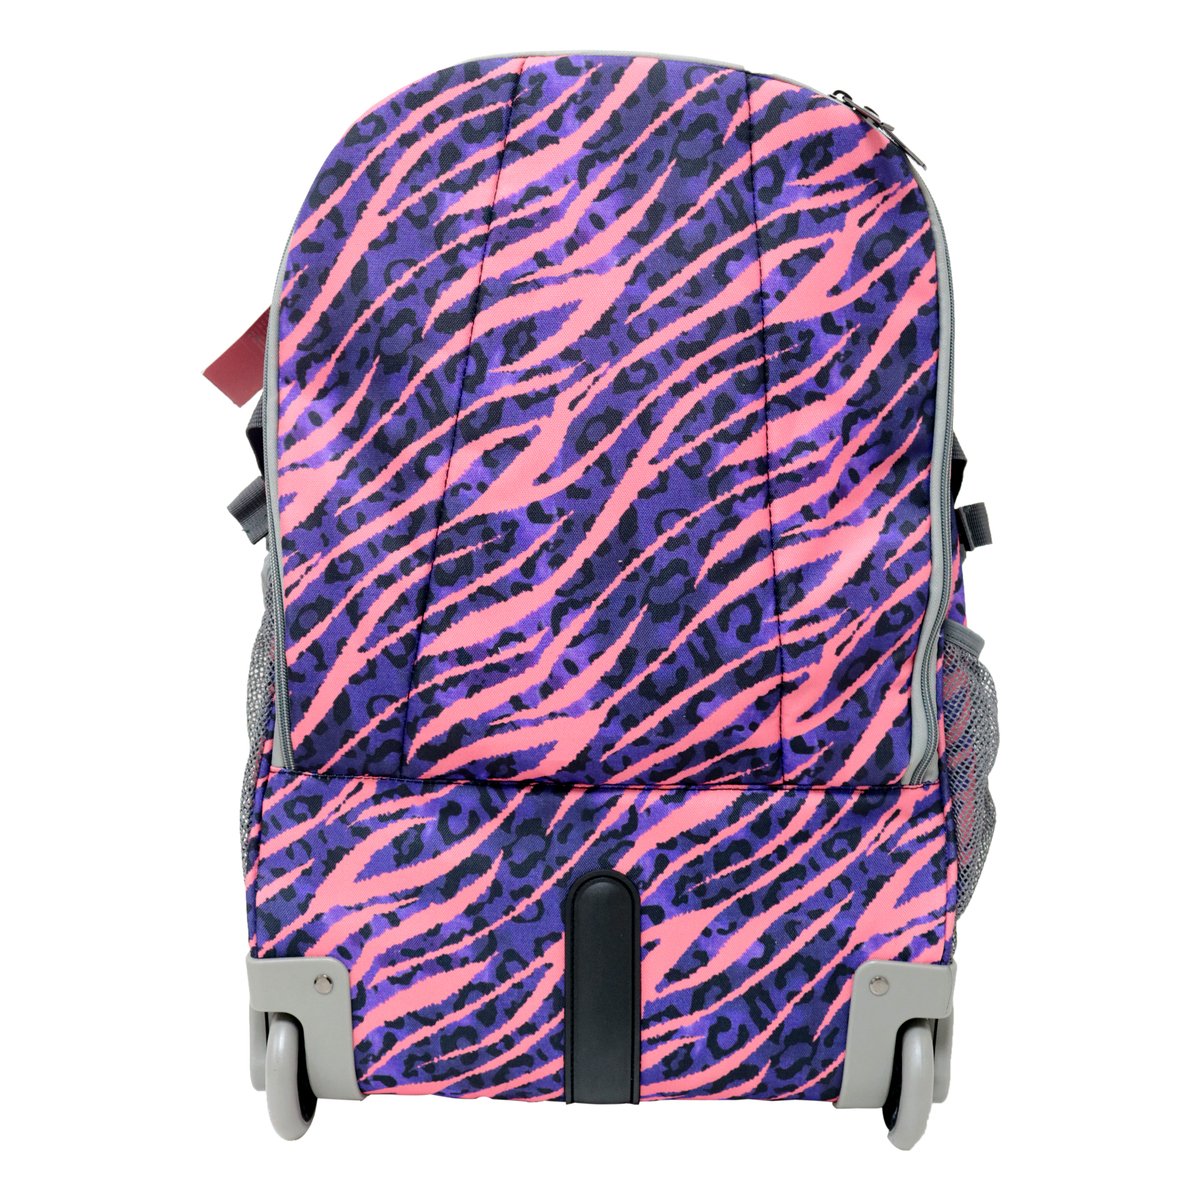 Wagon-R Back Pack Laptop Bag 2084 22In